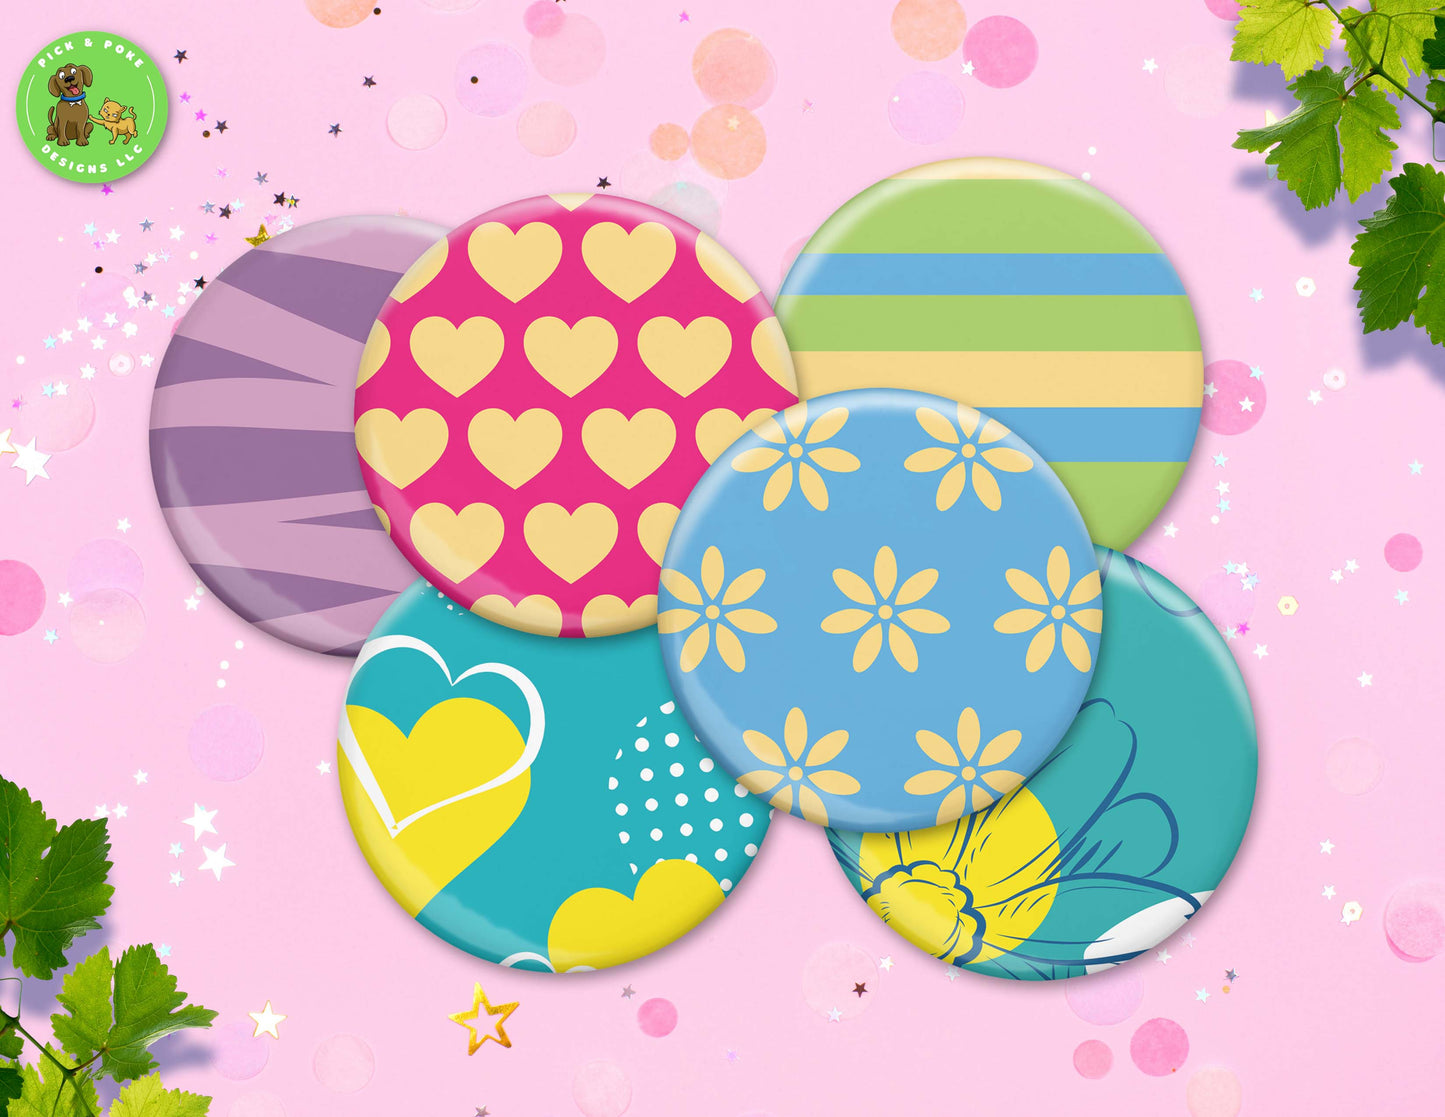 Colorful Patterns with Flowers, Hearts, and Stripes | Pin-Back Button, Key Chain, Magnet, Bottle Opener, or Mirror Option | 2.25-inch Size